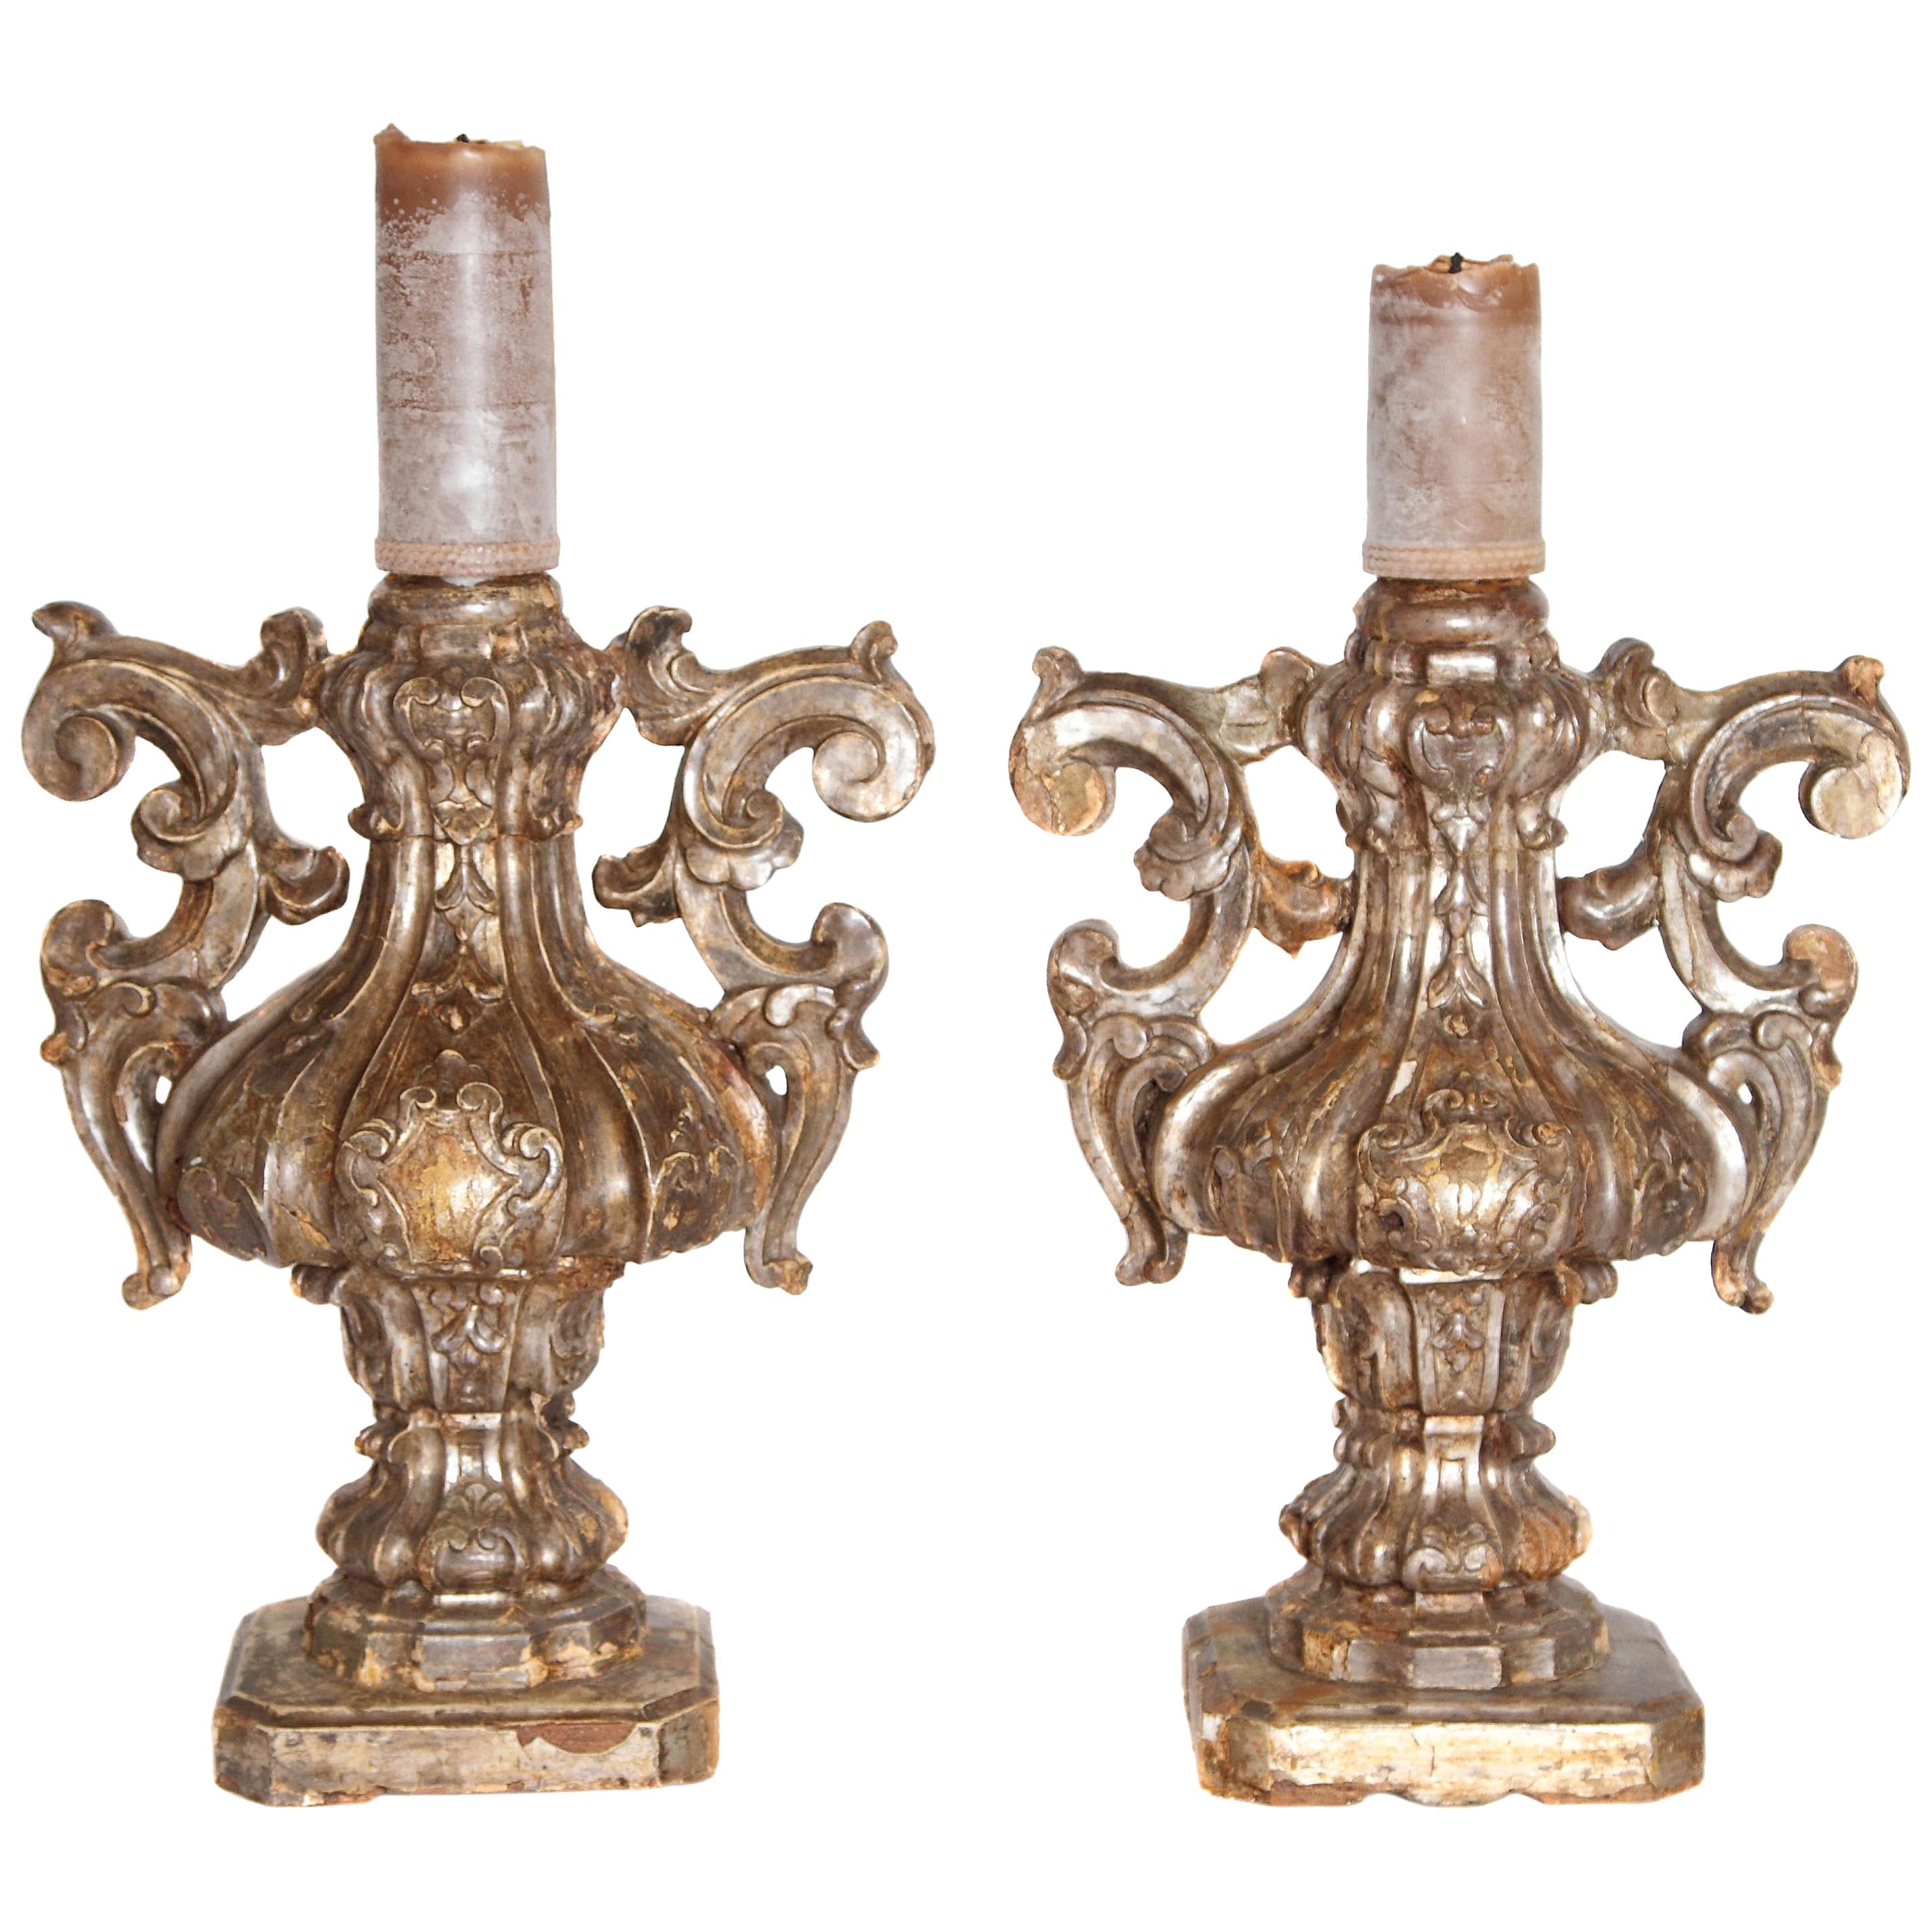 Pair of Late 18th Century Italian Carved and Gilt Candleholders